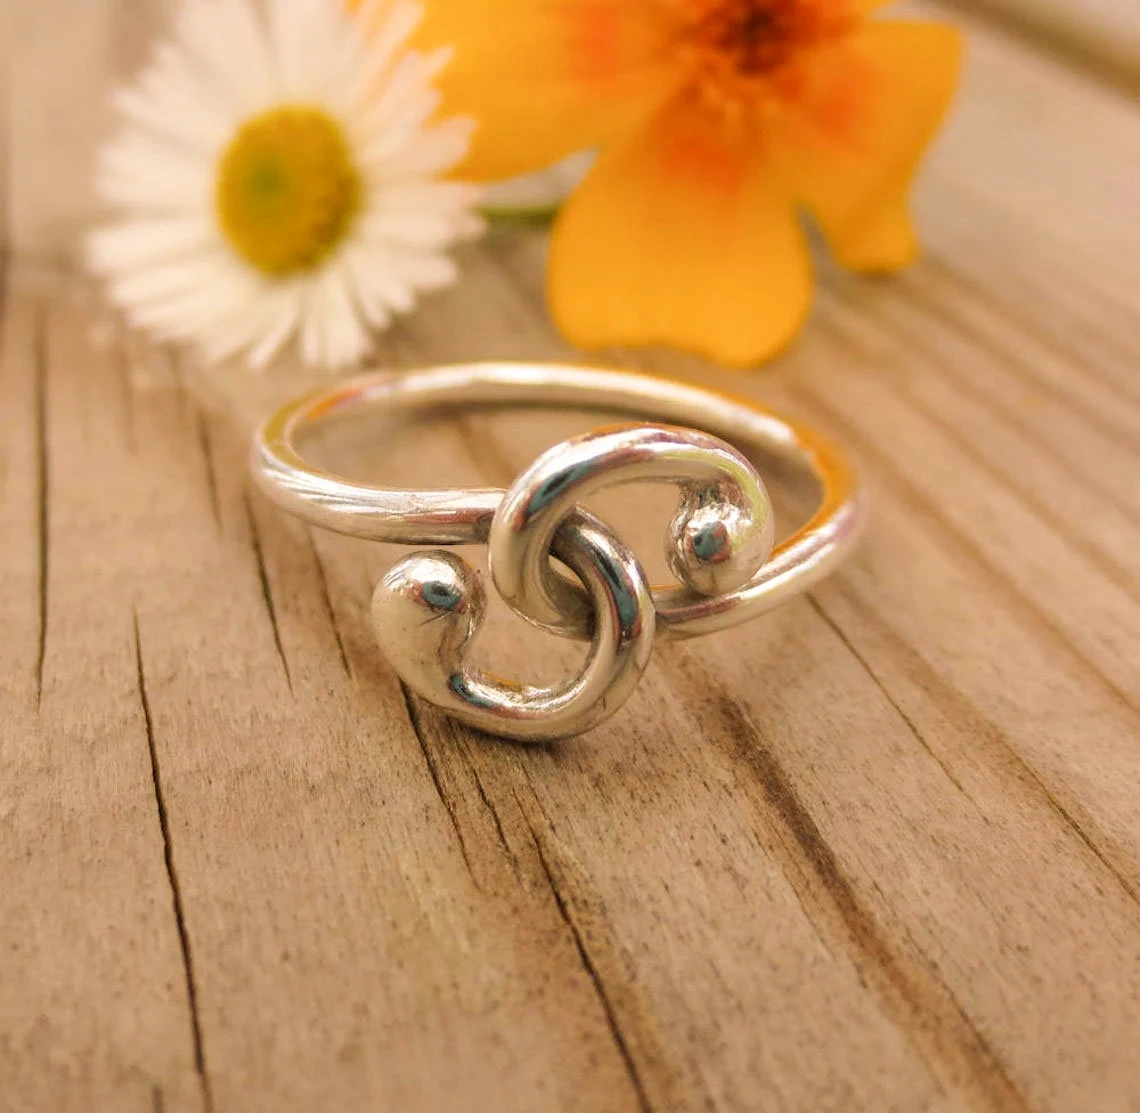 925 Sterling Silver Solid Entwined Spiral Ring Handmade Dainty Stacking Silver Delicate Ring Boho Style Jewelry Unique Skinny swirl ring-10 3/4 US/Uk size – V-1